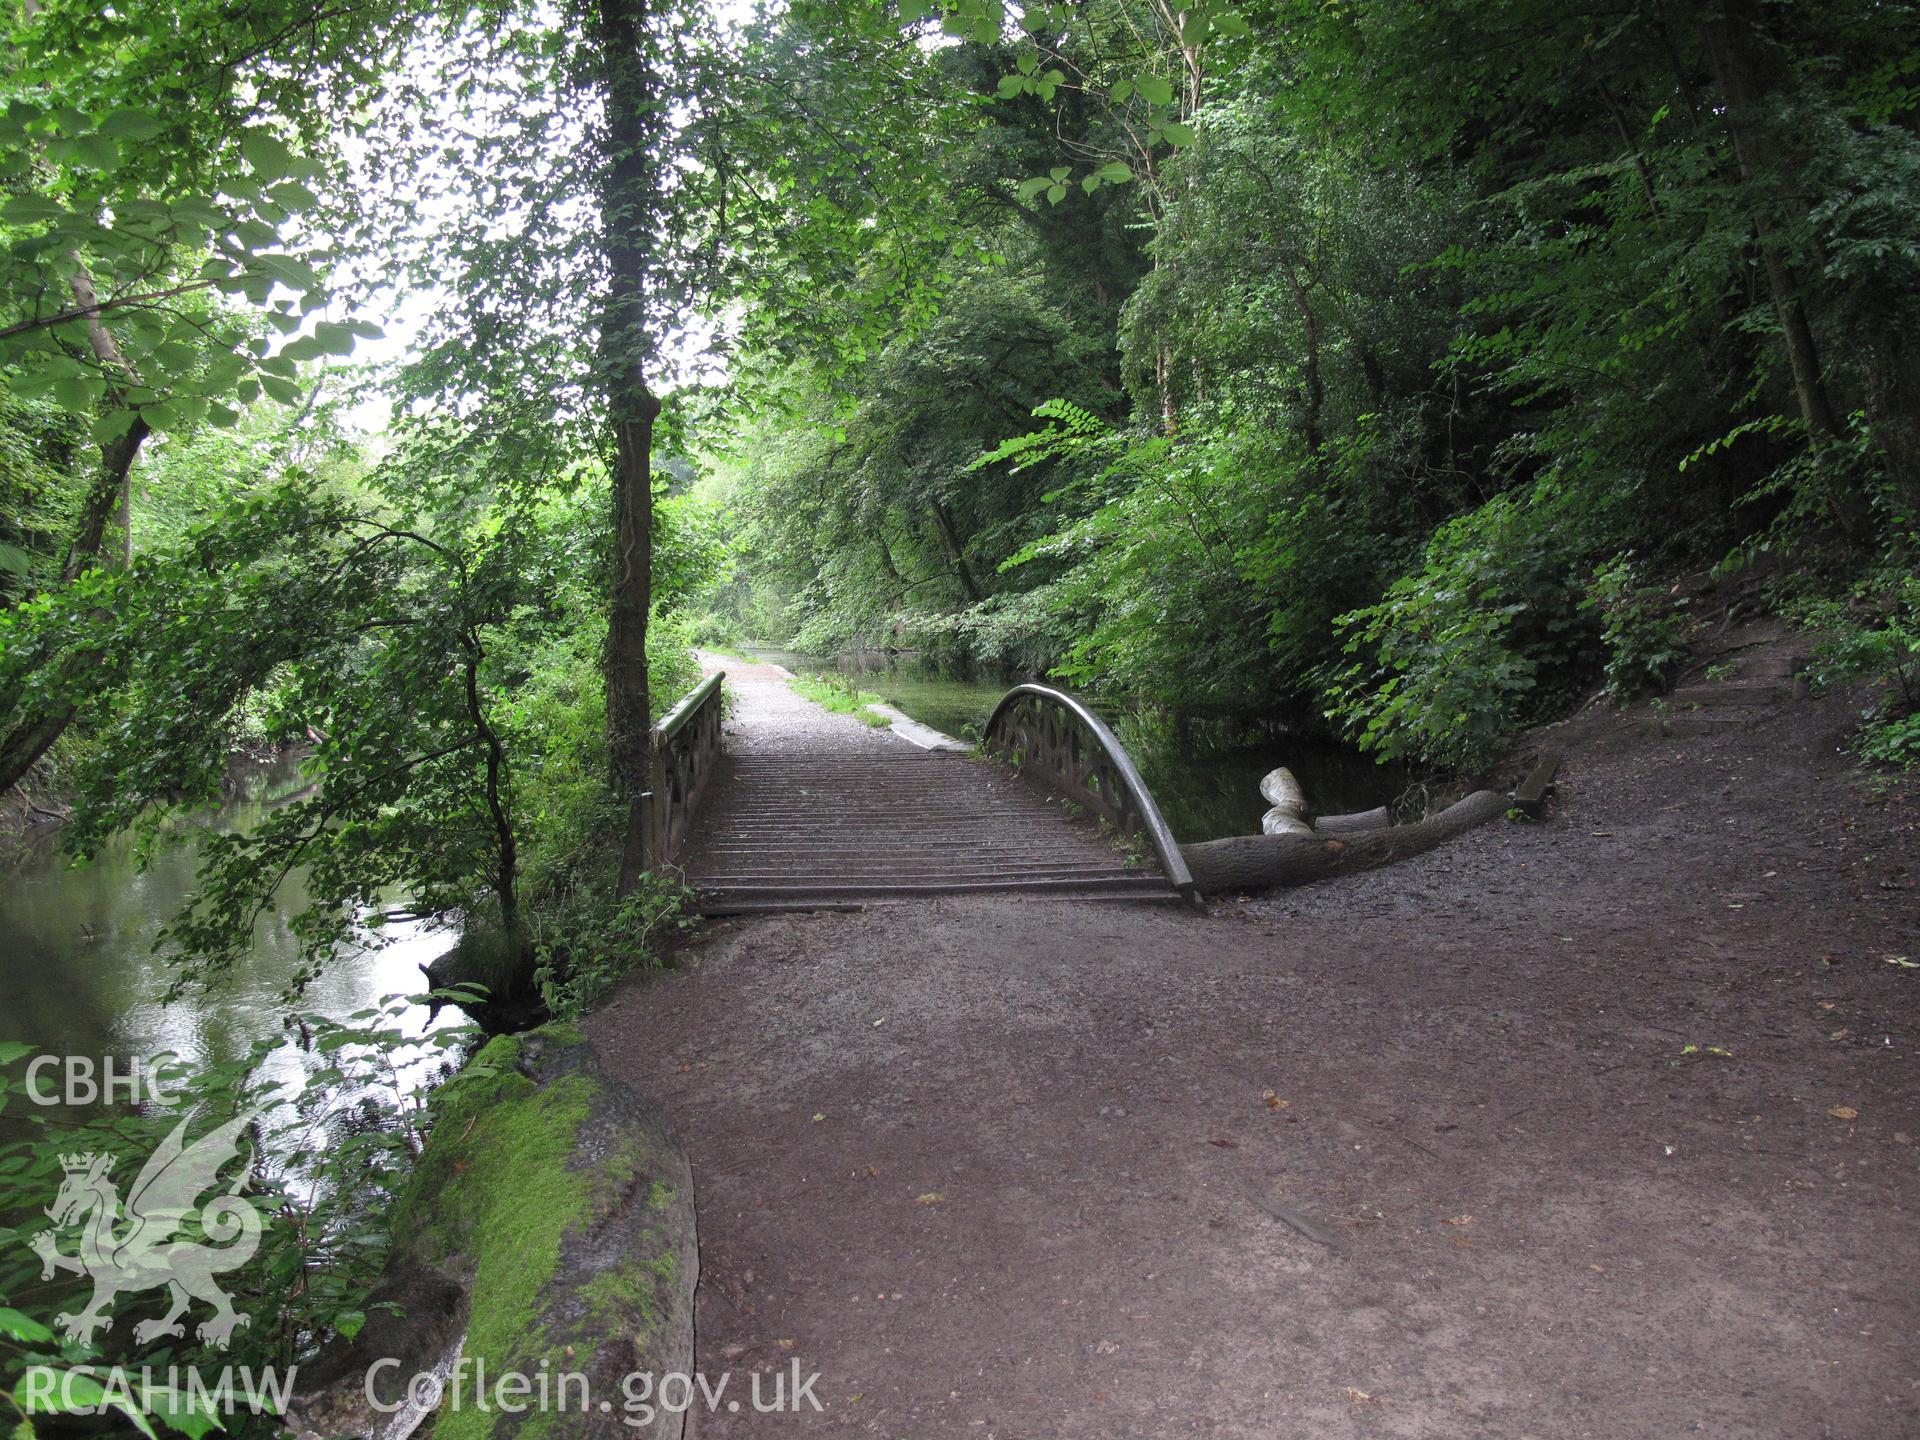 View from the south of the Glamorganshire Canal towing path bridge at Melingriffith.